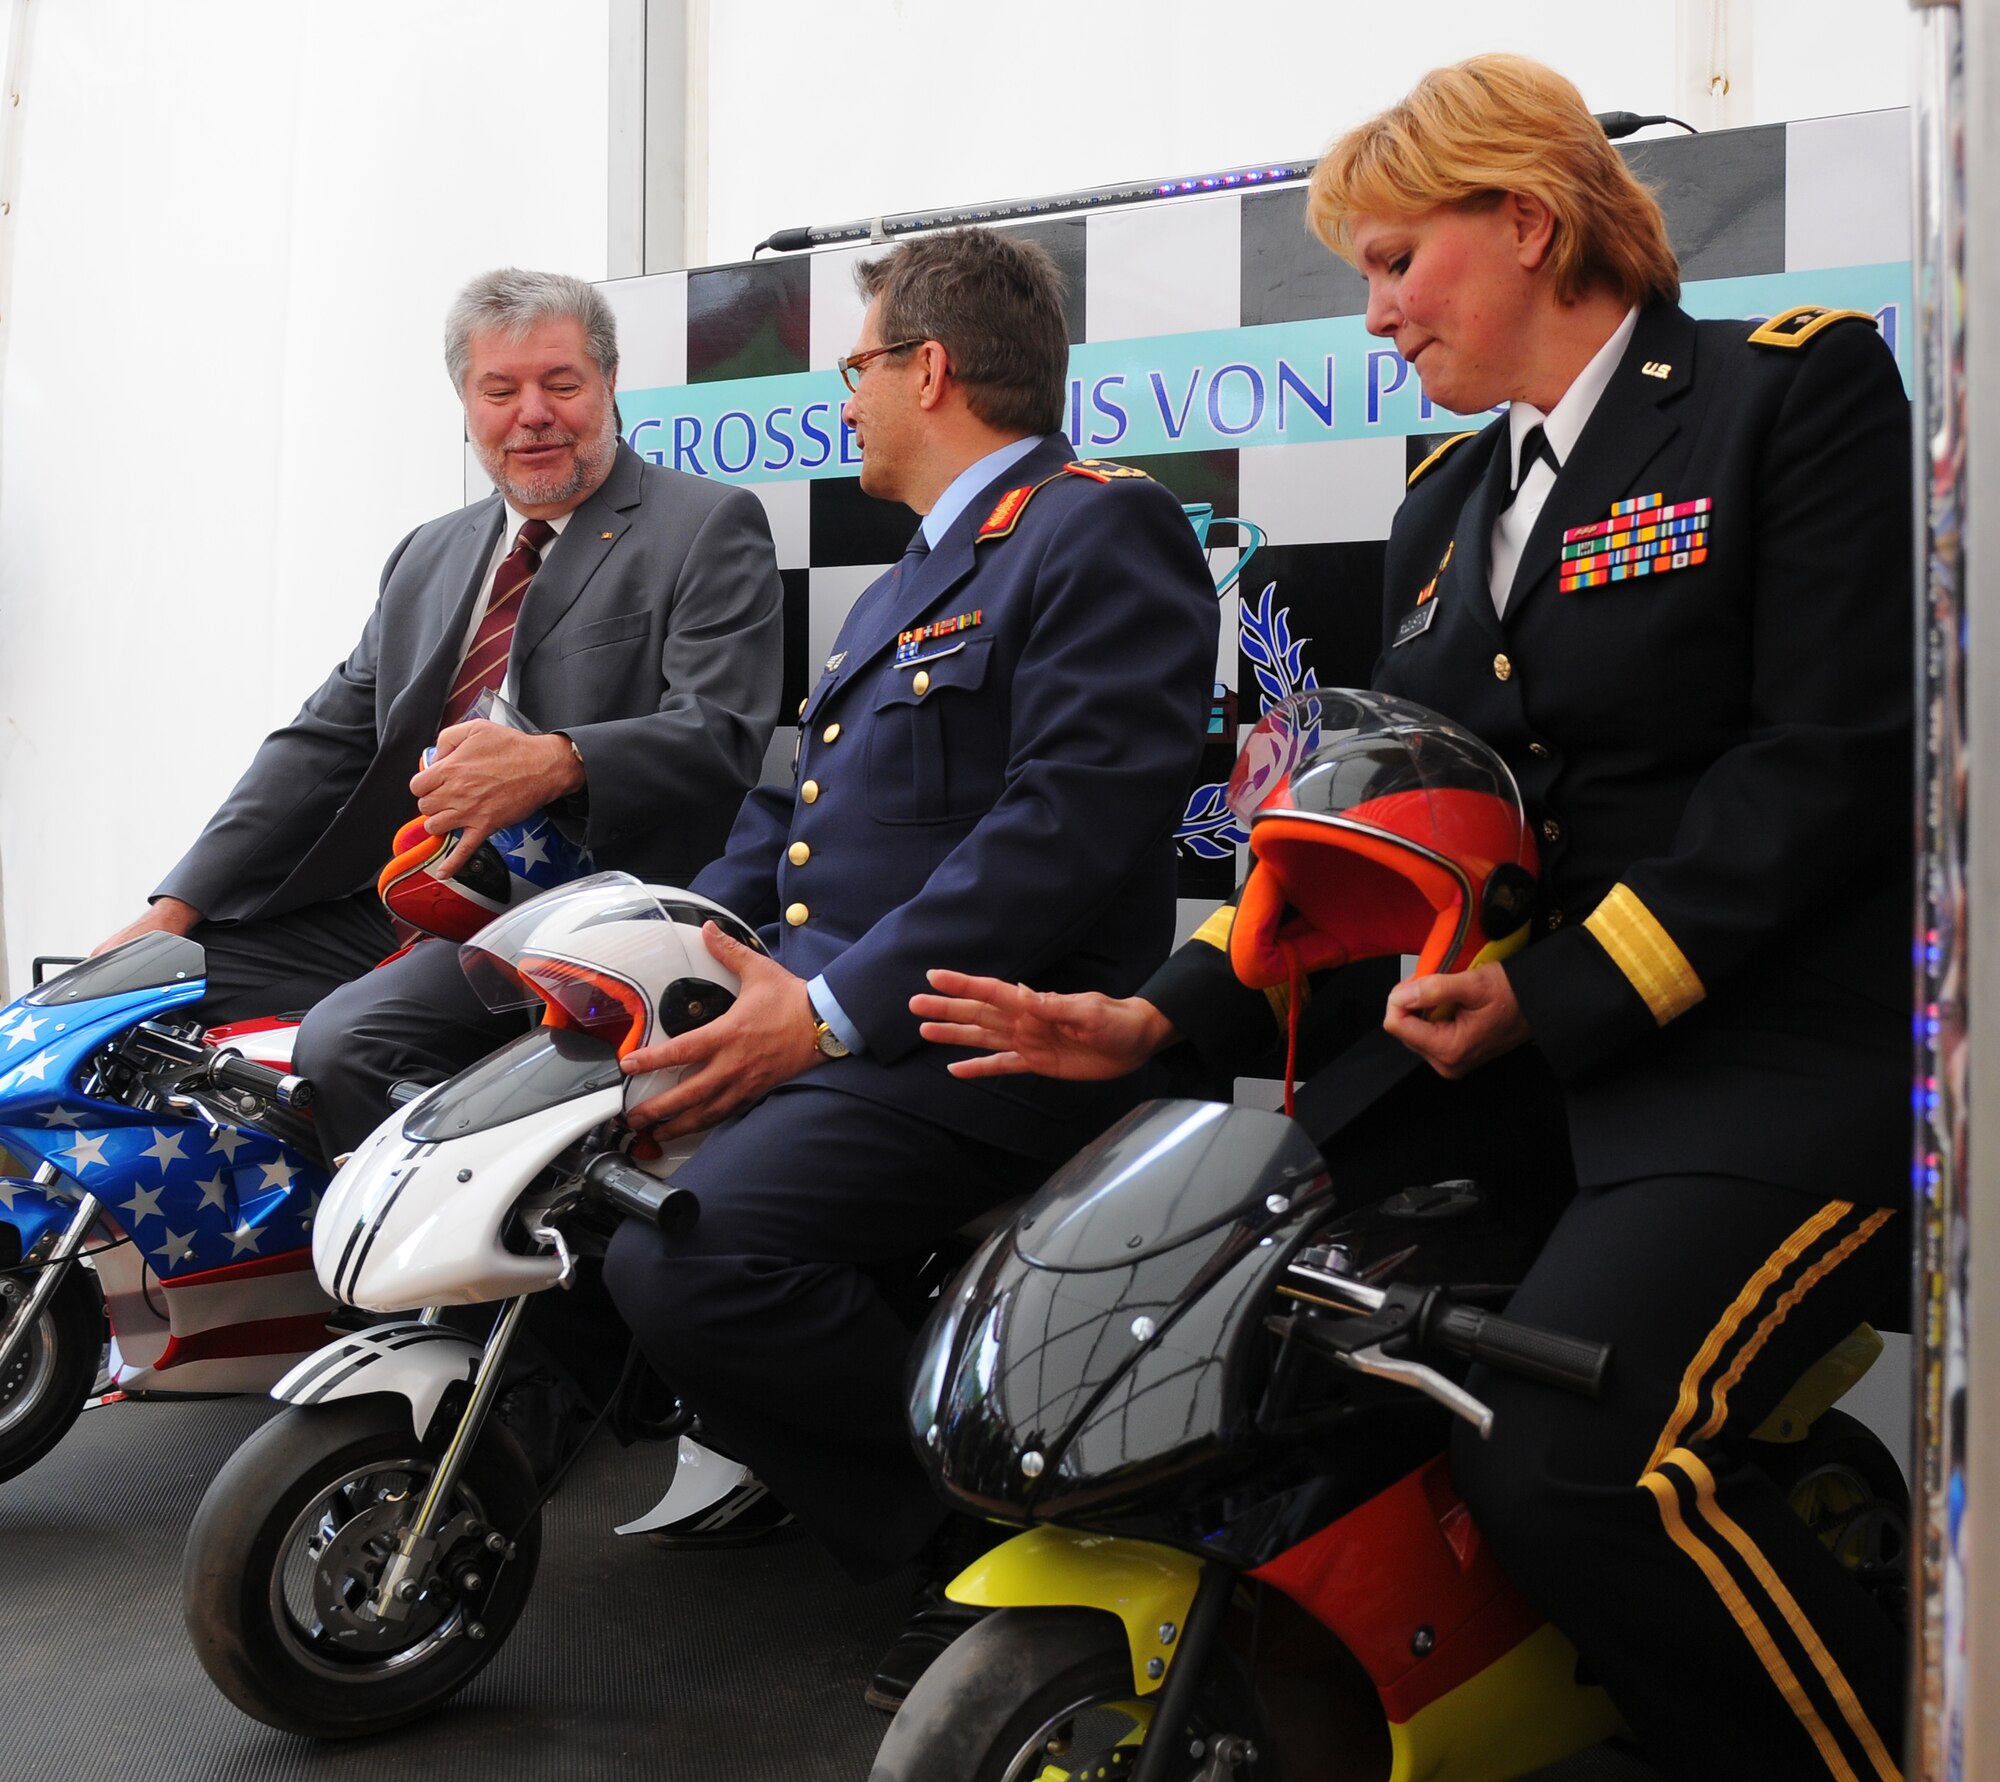 PRUEM, Germany – Kurt Beck, Rheinland-Pfalz minister president, poses for photos on miniature motorcycles with German and U.S. military officers during the Rheinland-Pfalz Day Fair in Pruem, Germany, May 28. The Rheinland-Pfalz Day Fair is a three-day festival with entertainment, informational booths and other attractions. (U.S. Air Force photo/Airman 1st Class Dillon Davis)